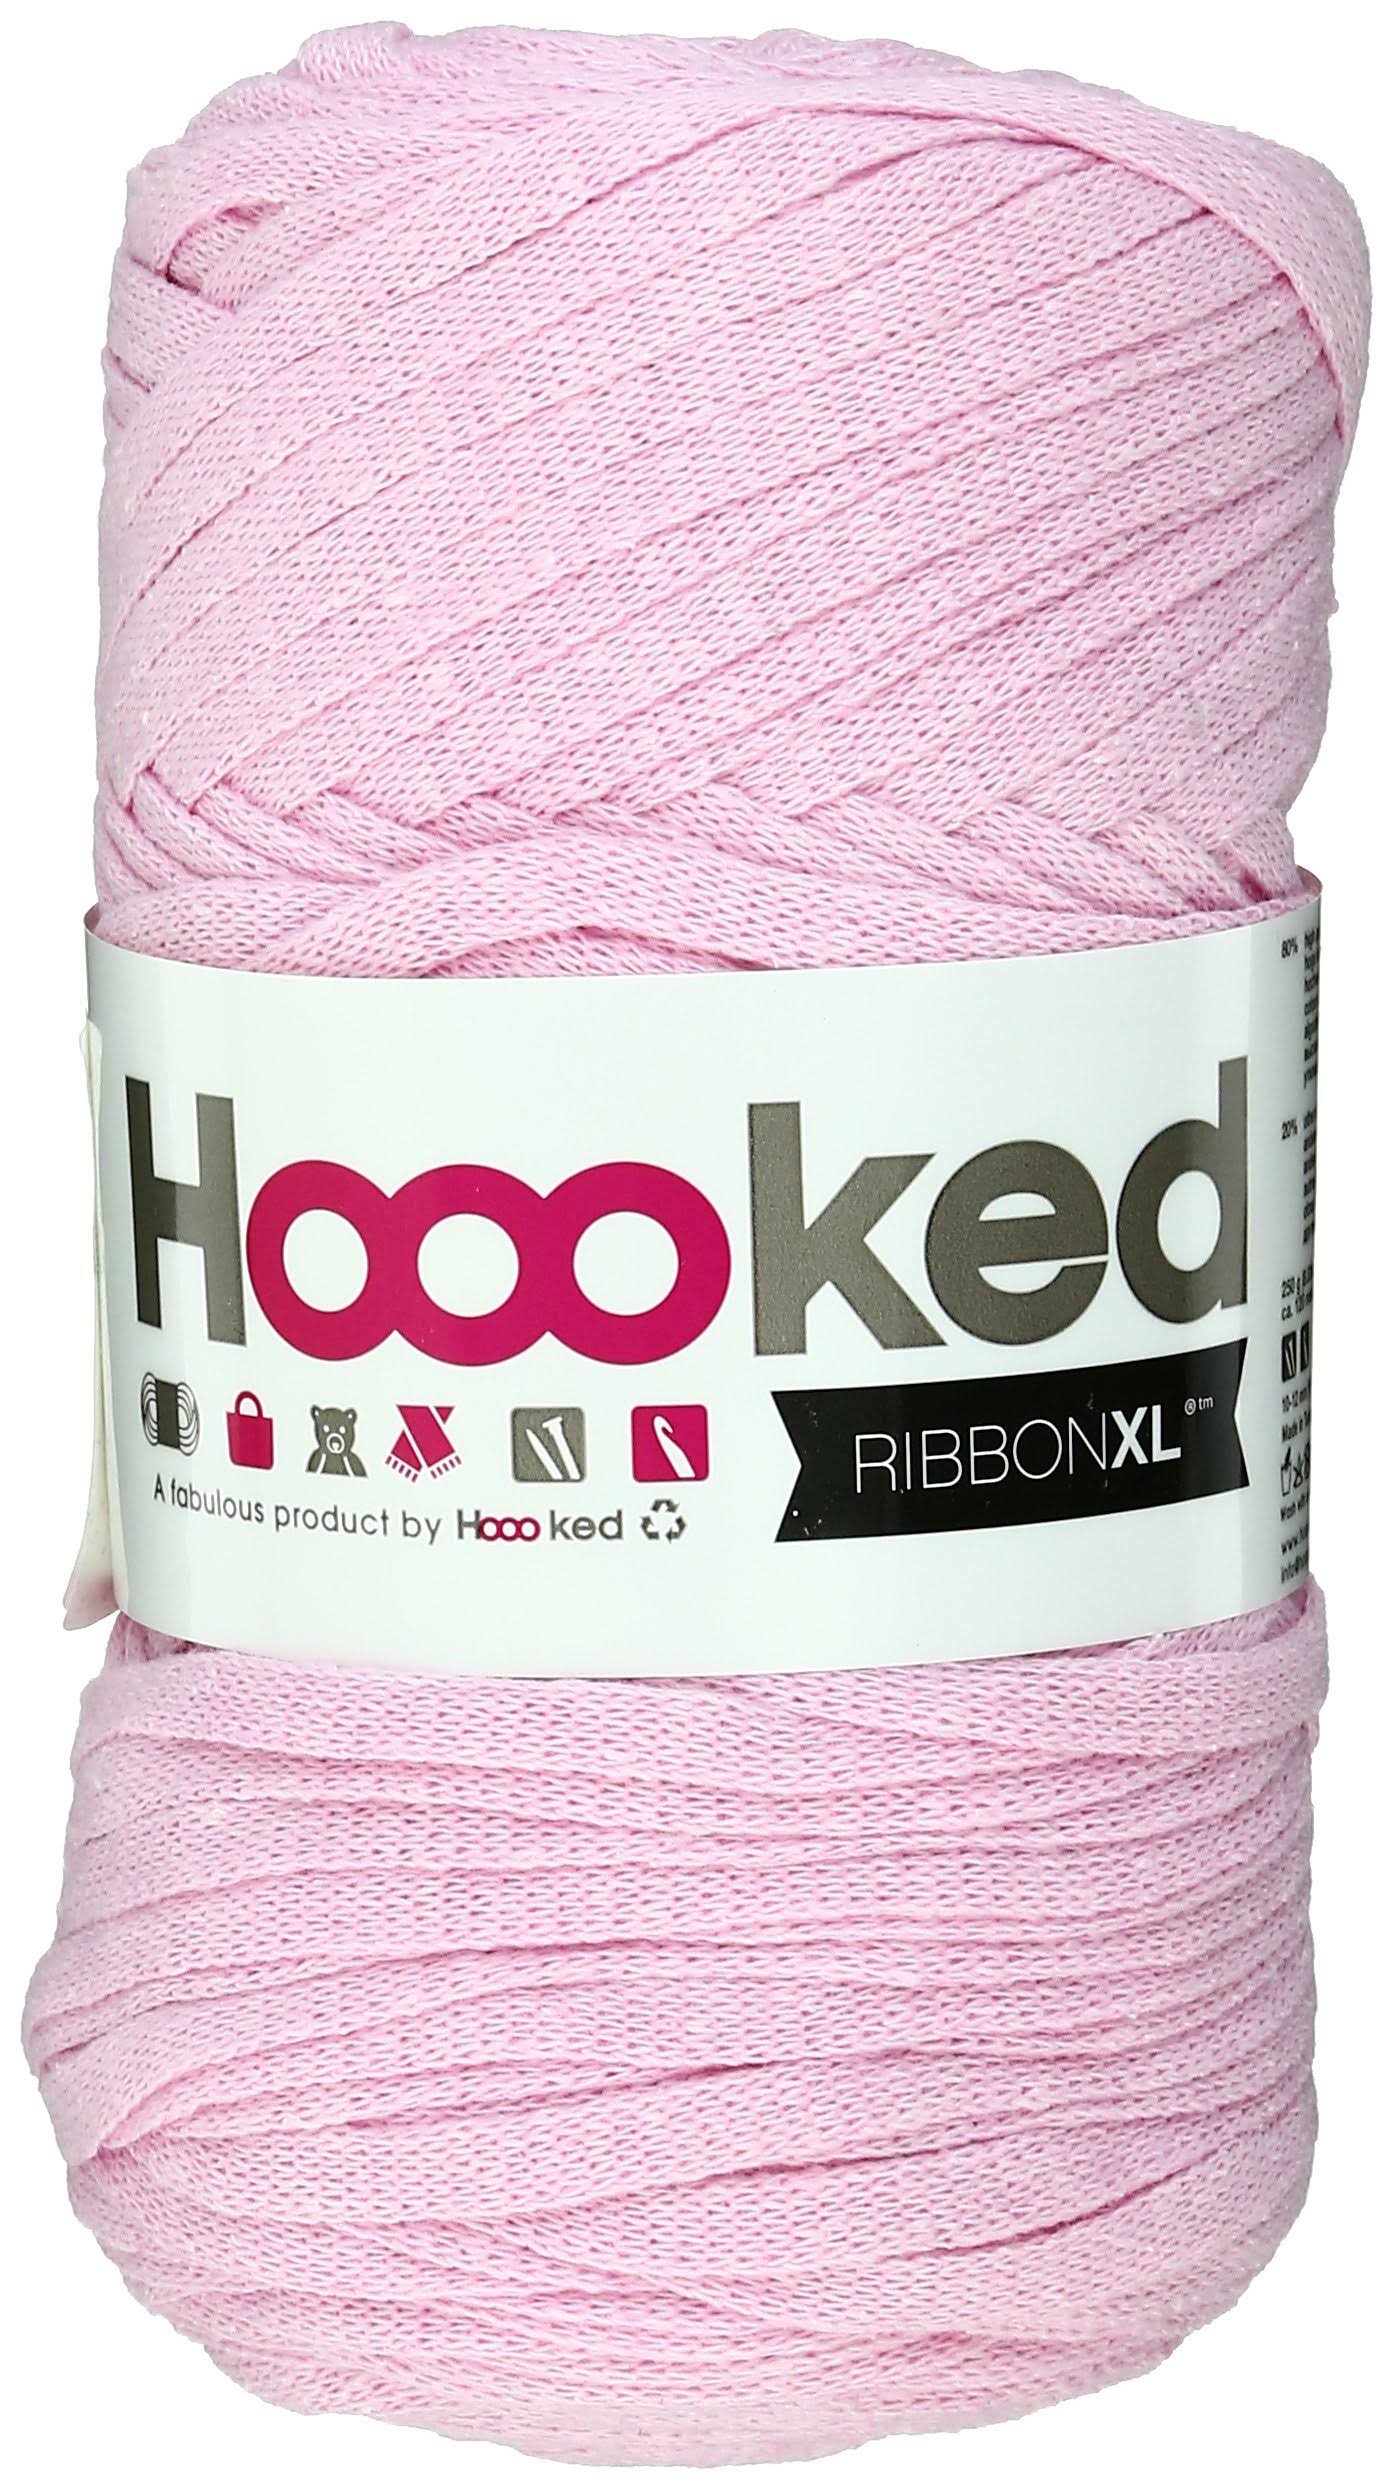 Hoooked Ribbon XL Solids - Sweet Pink (40)